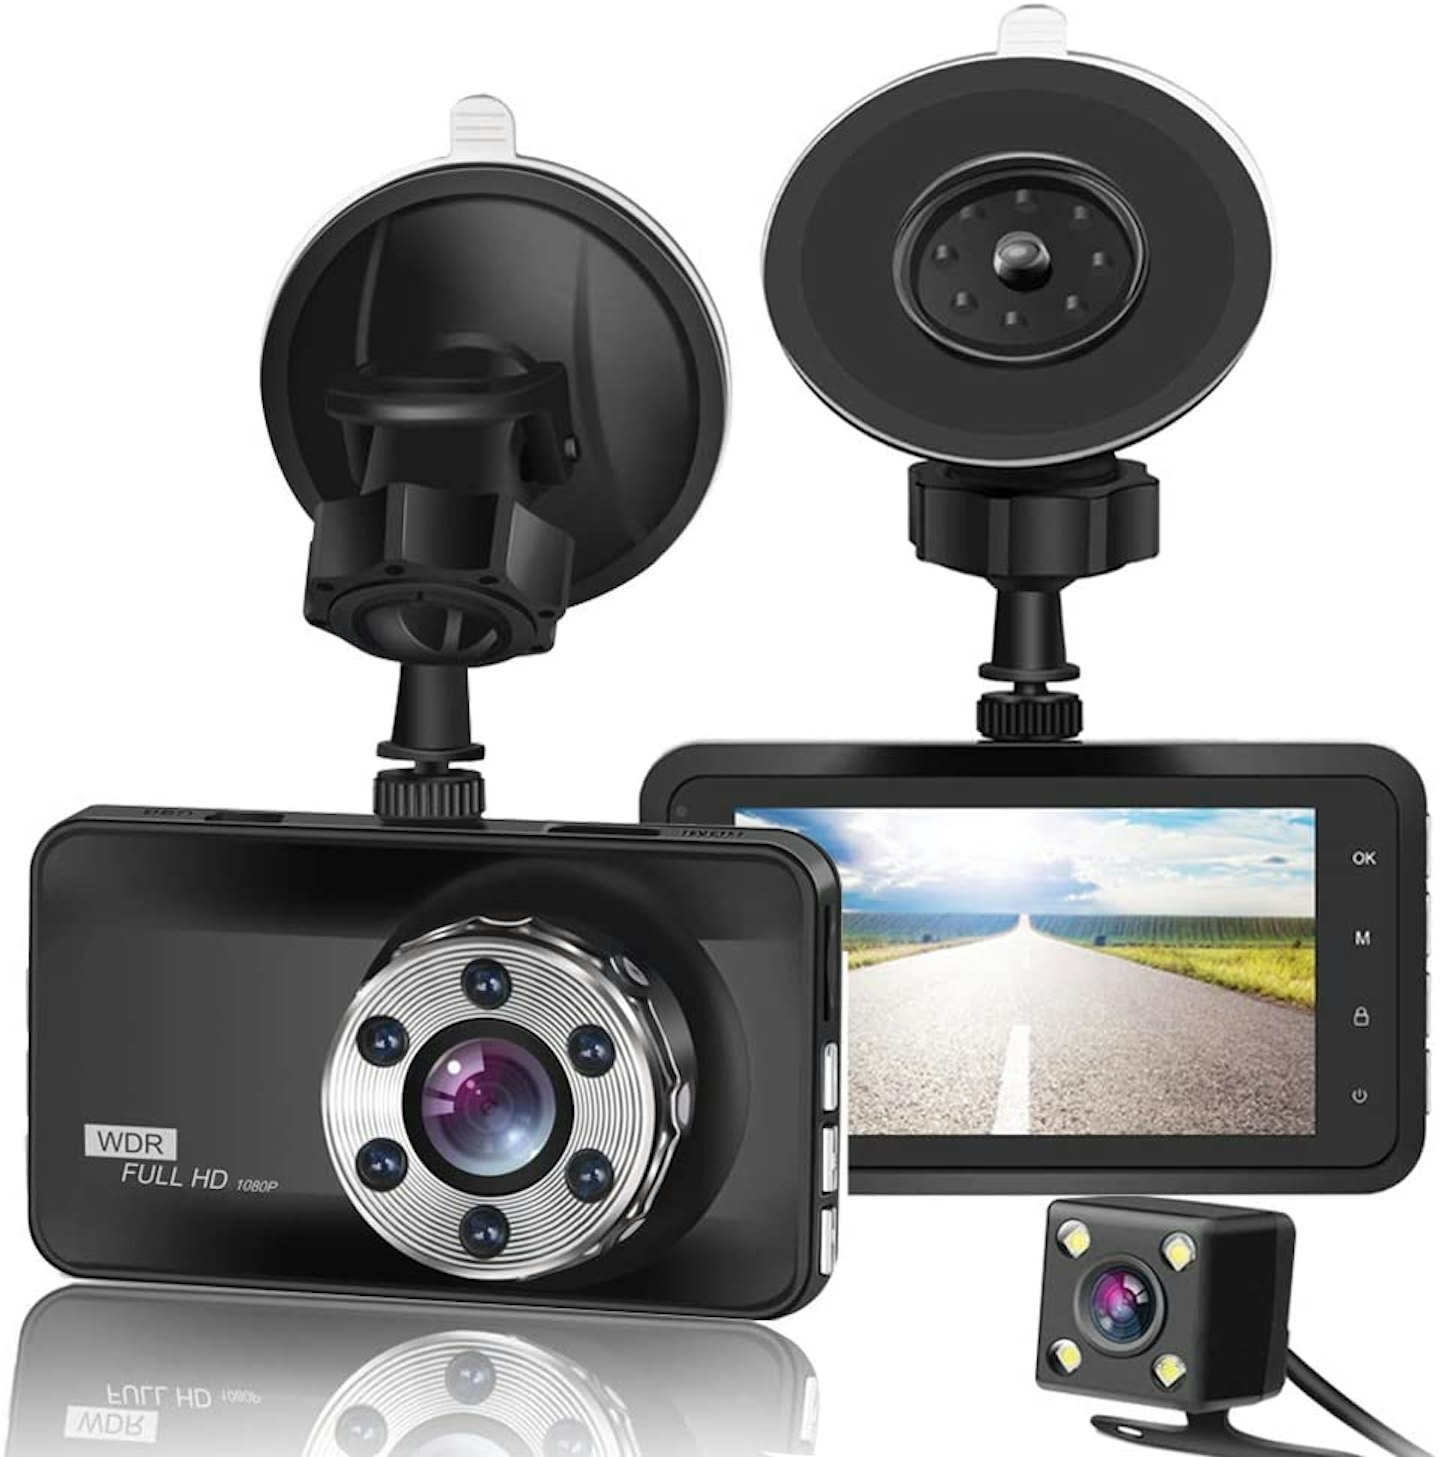 ORSKEY Dash Cam Front and Rear 1080P Full HD